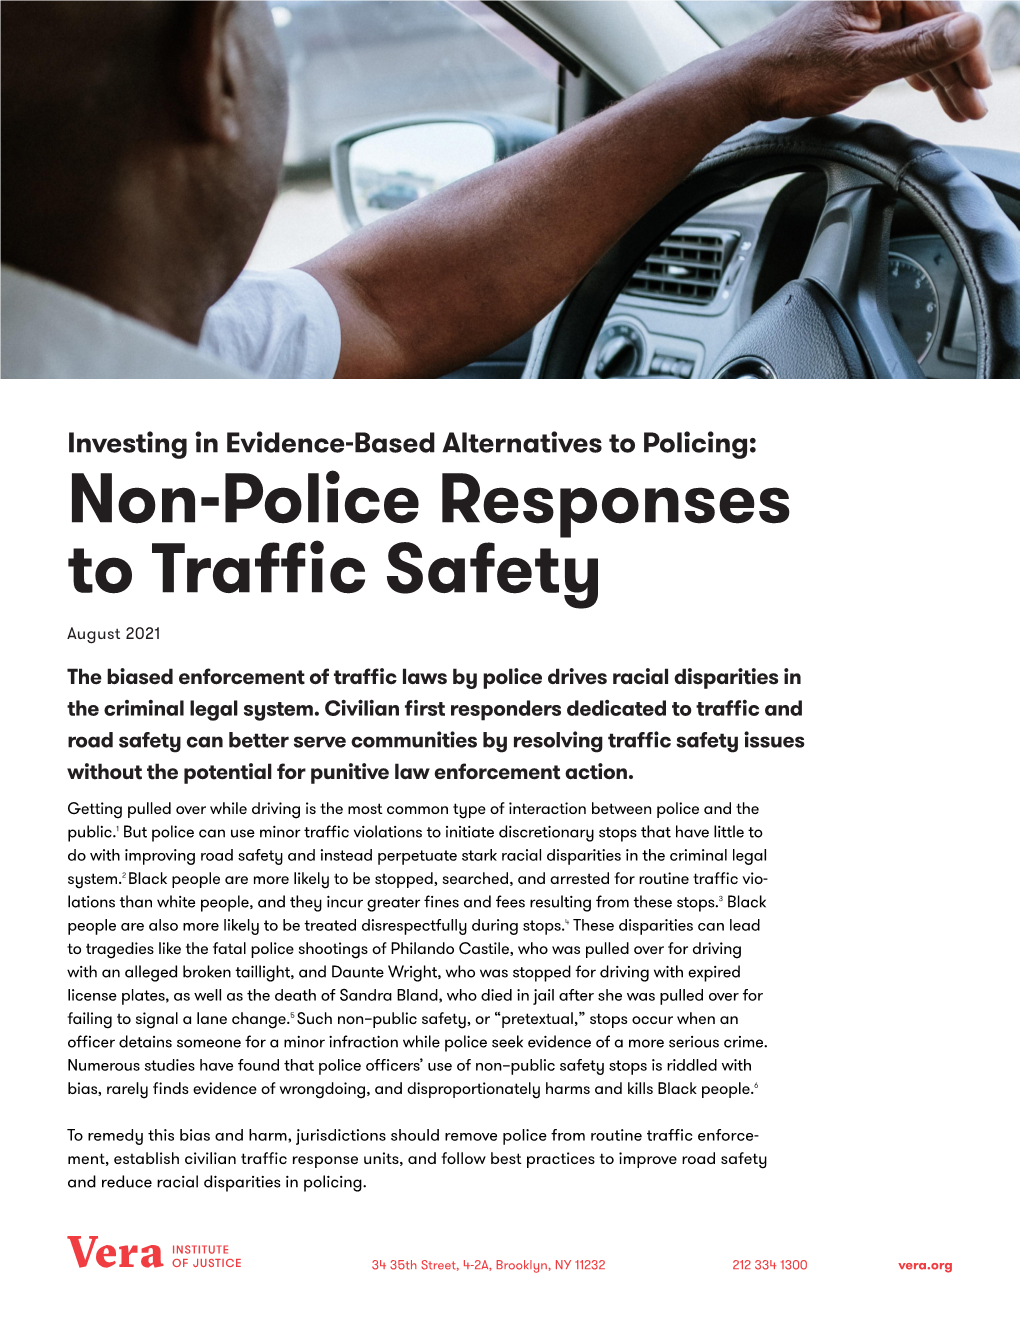 Non-Police Responses to Traffic Safety August 2021